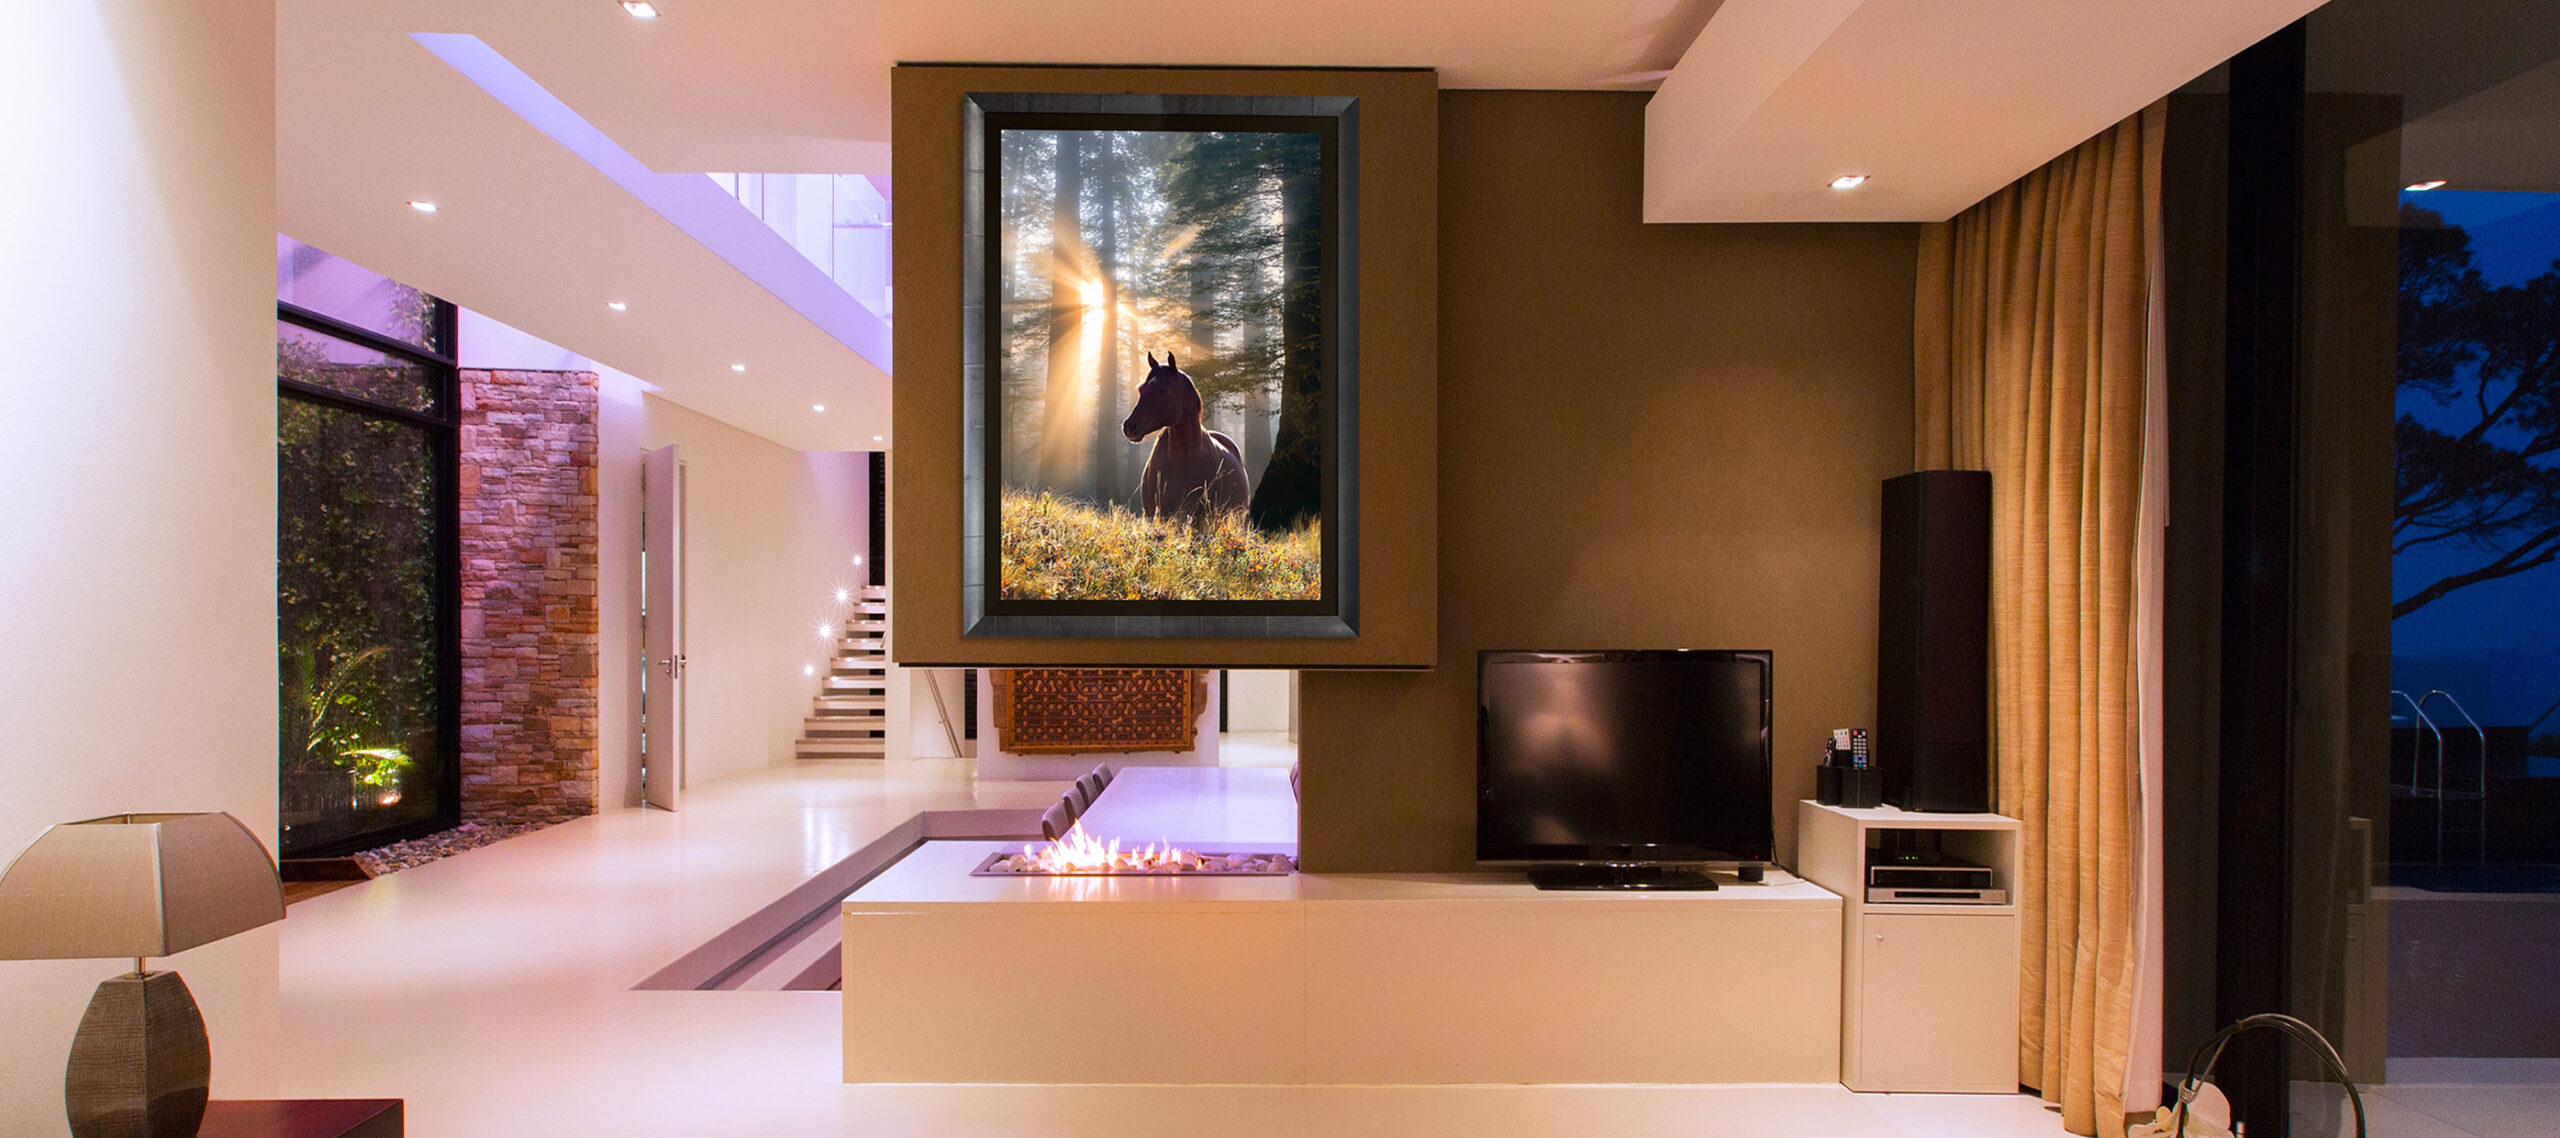 View,Of,Fireplace,In,Luxurious,Living,Room,During,Night